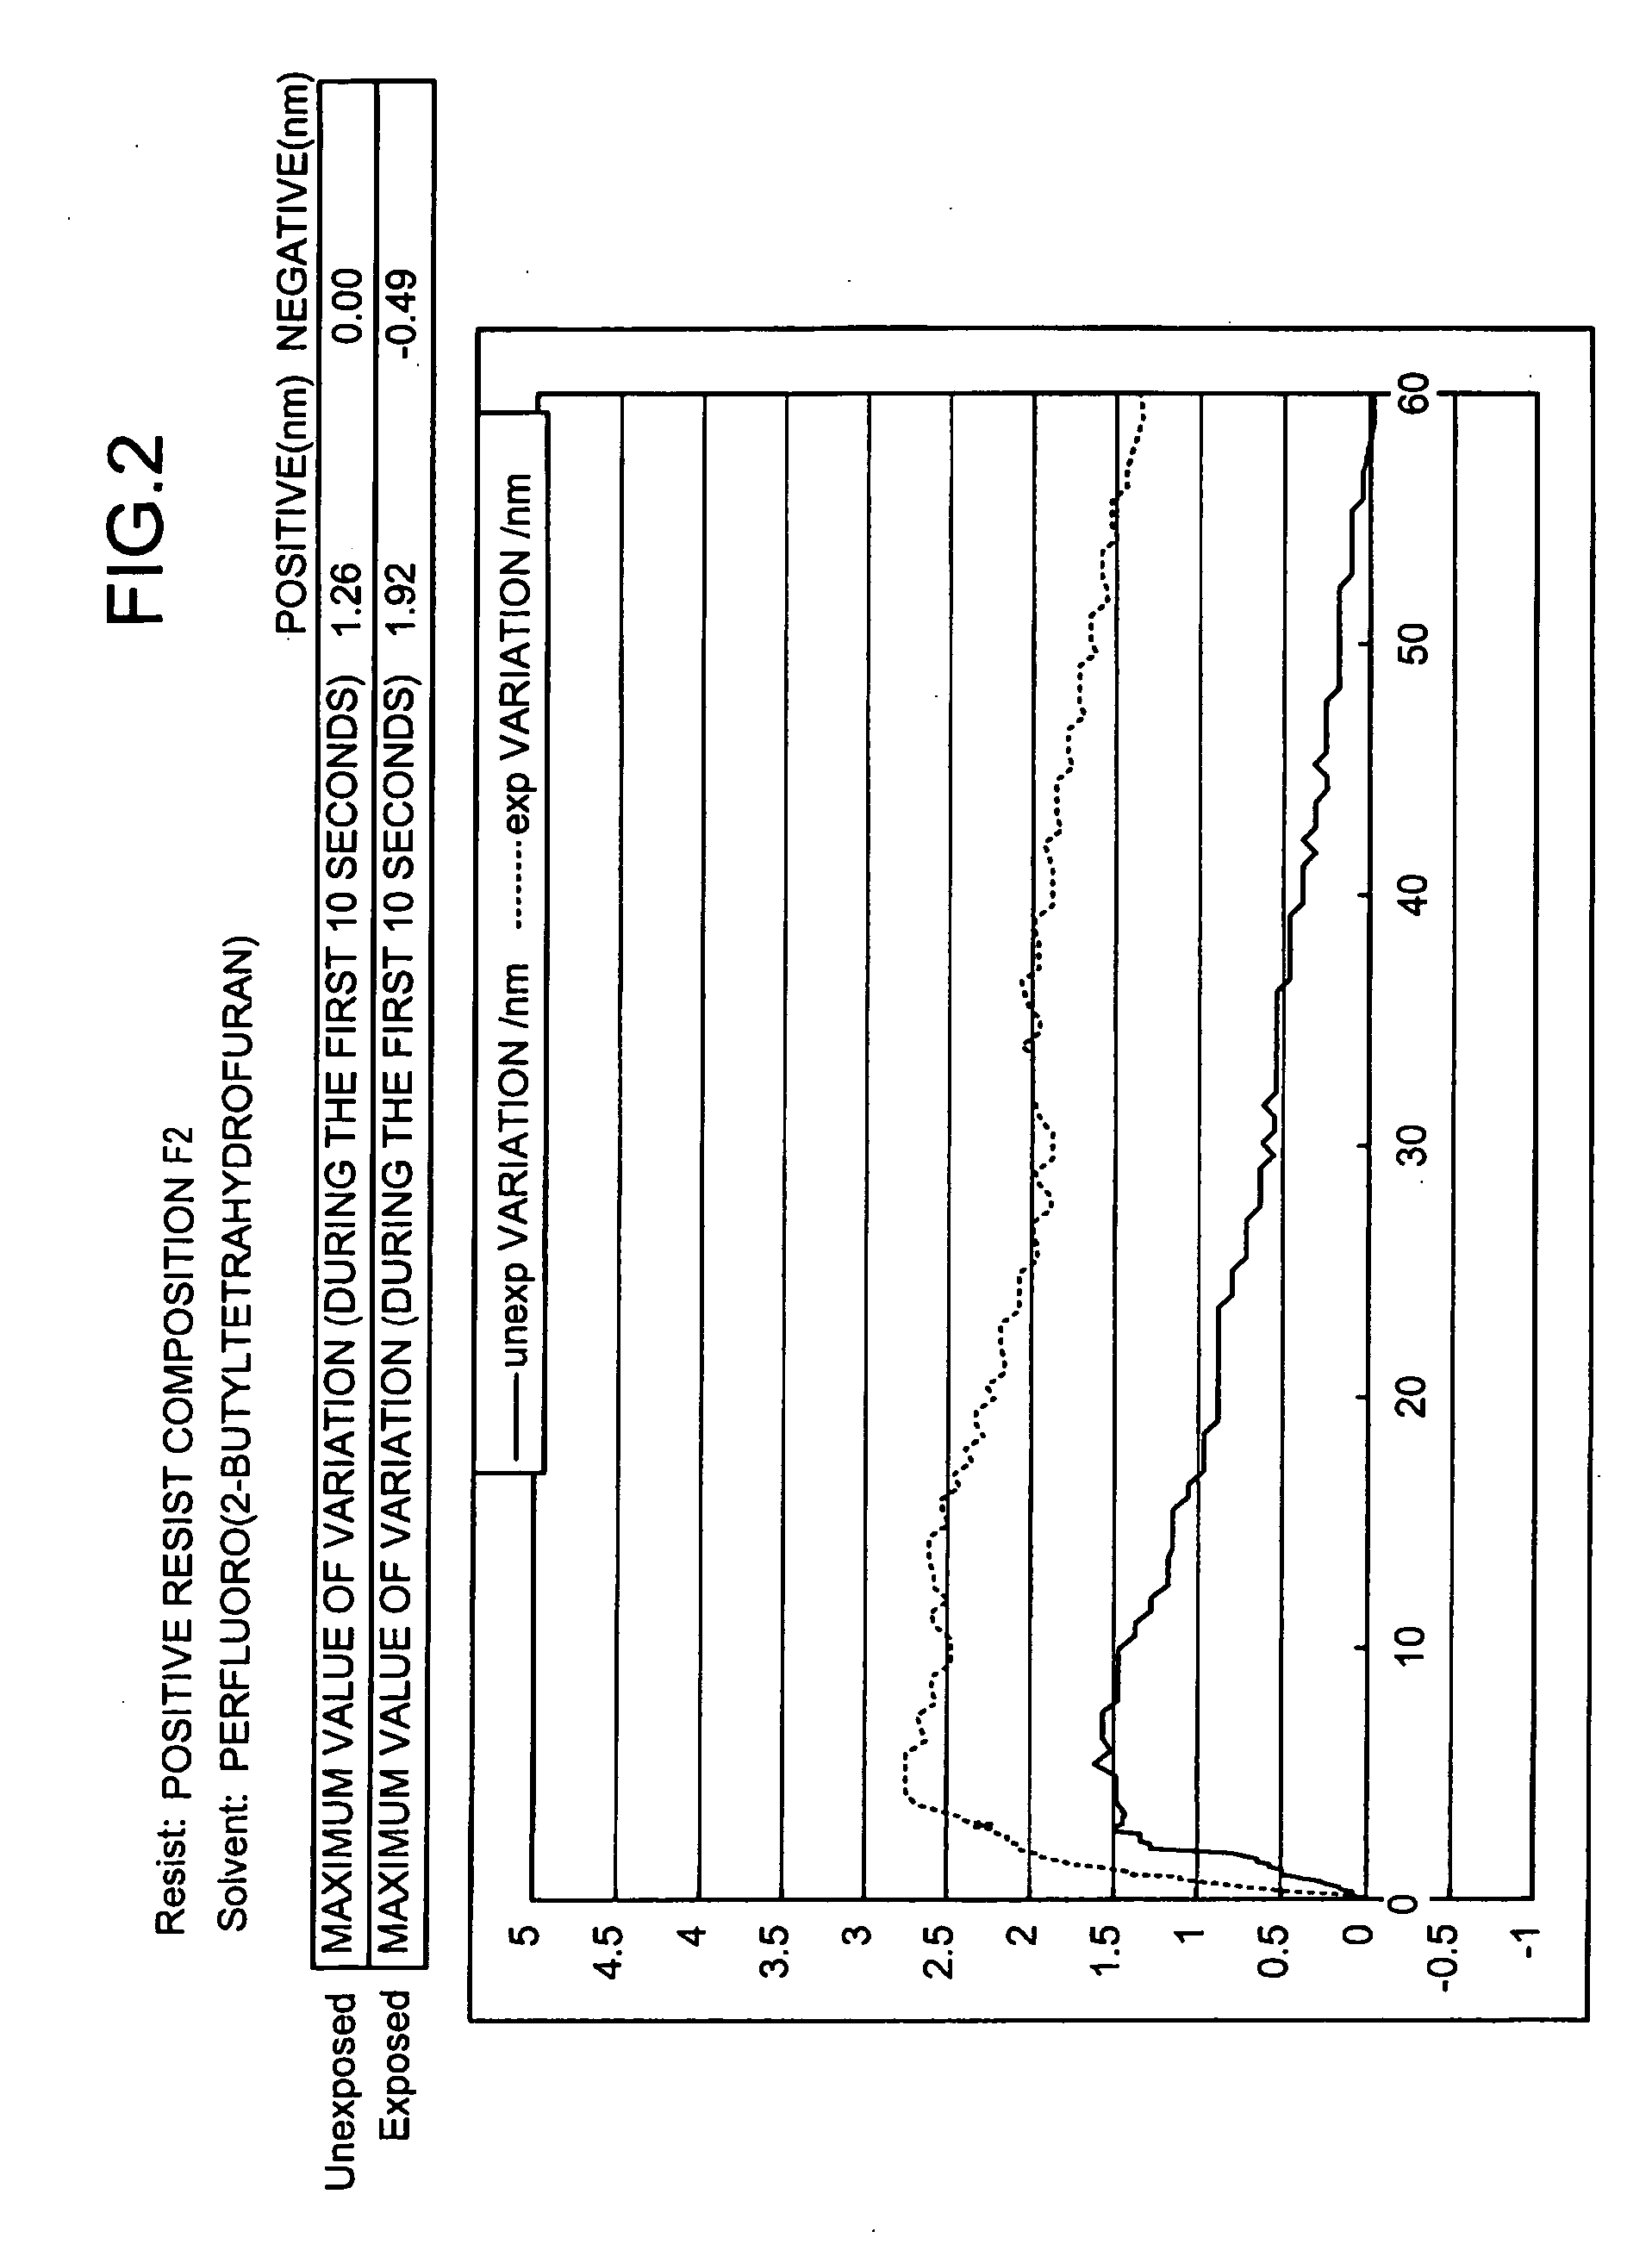 Immersion fluid for use in liquid immersion lithography and method of forming resist pattern using the immersion fluid